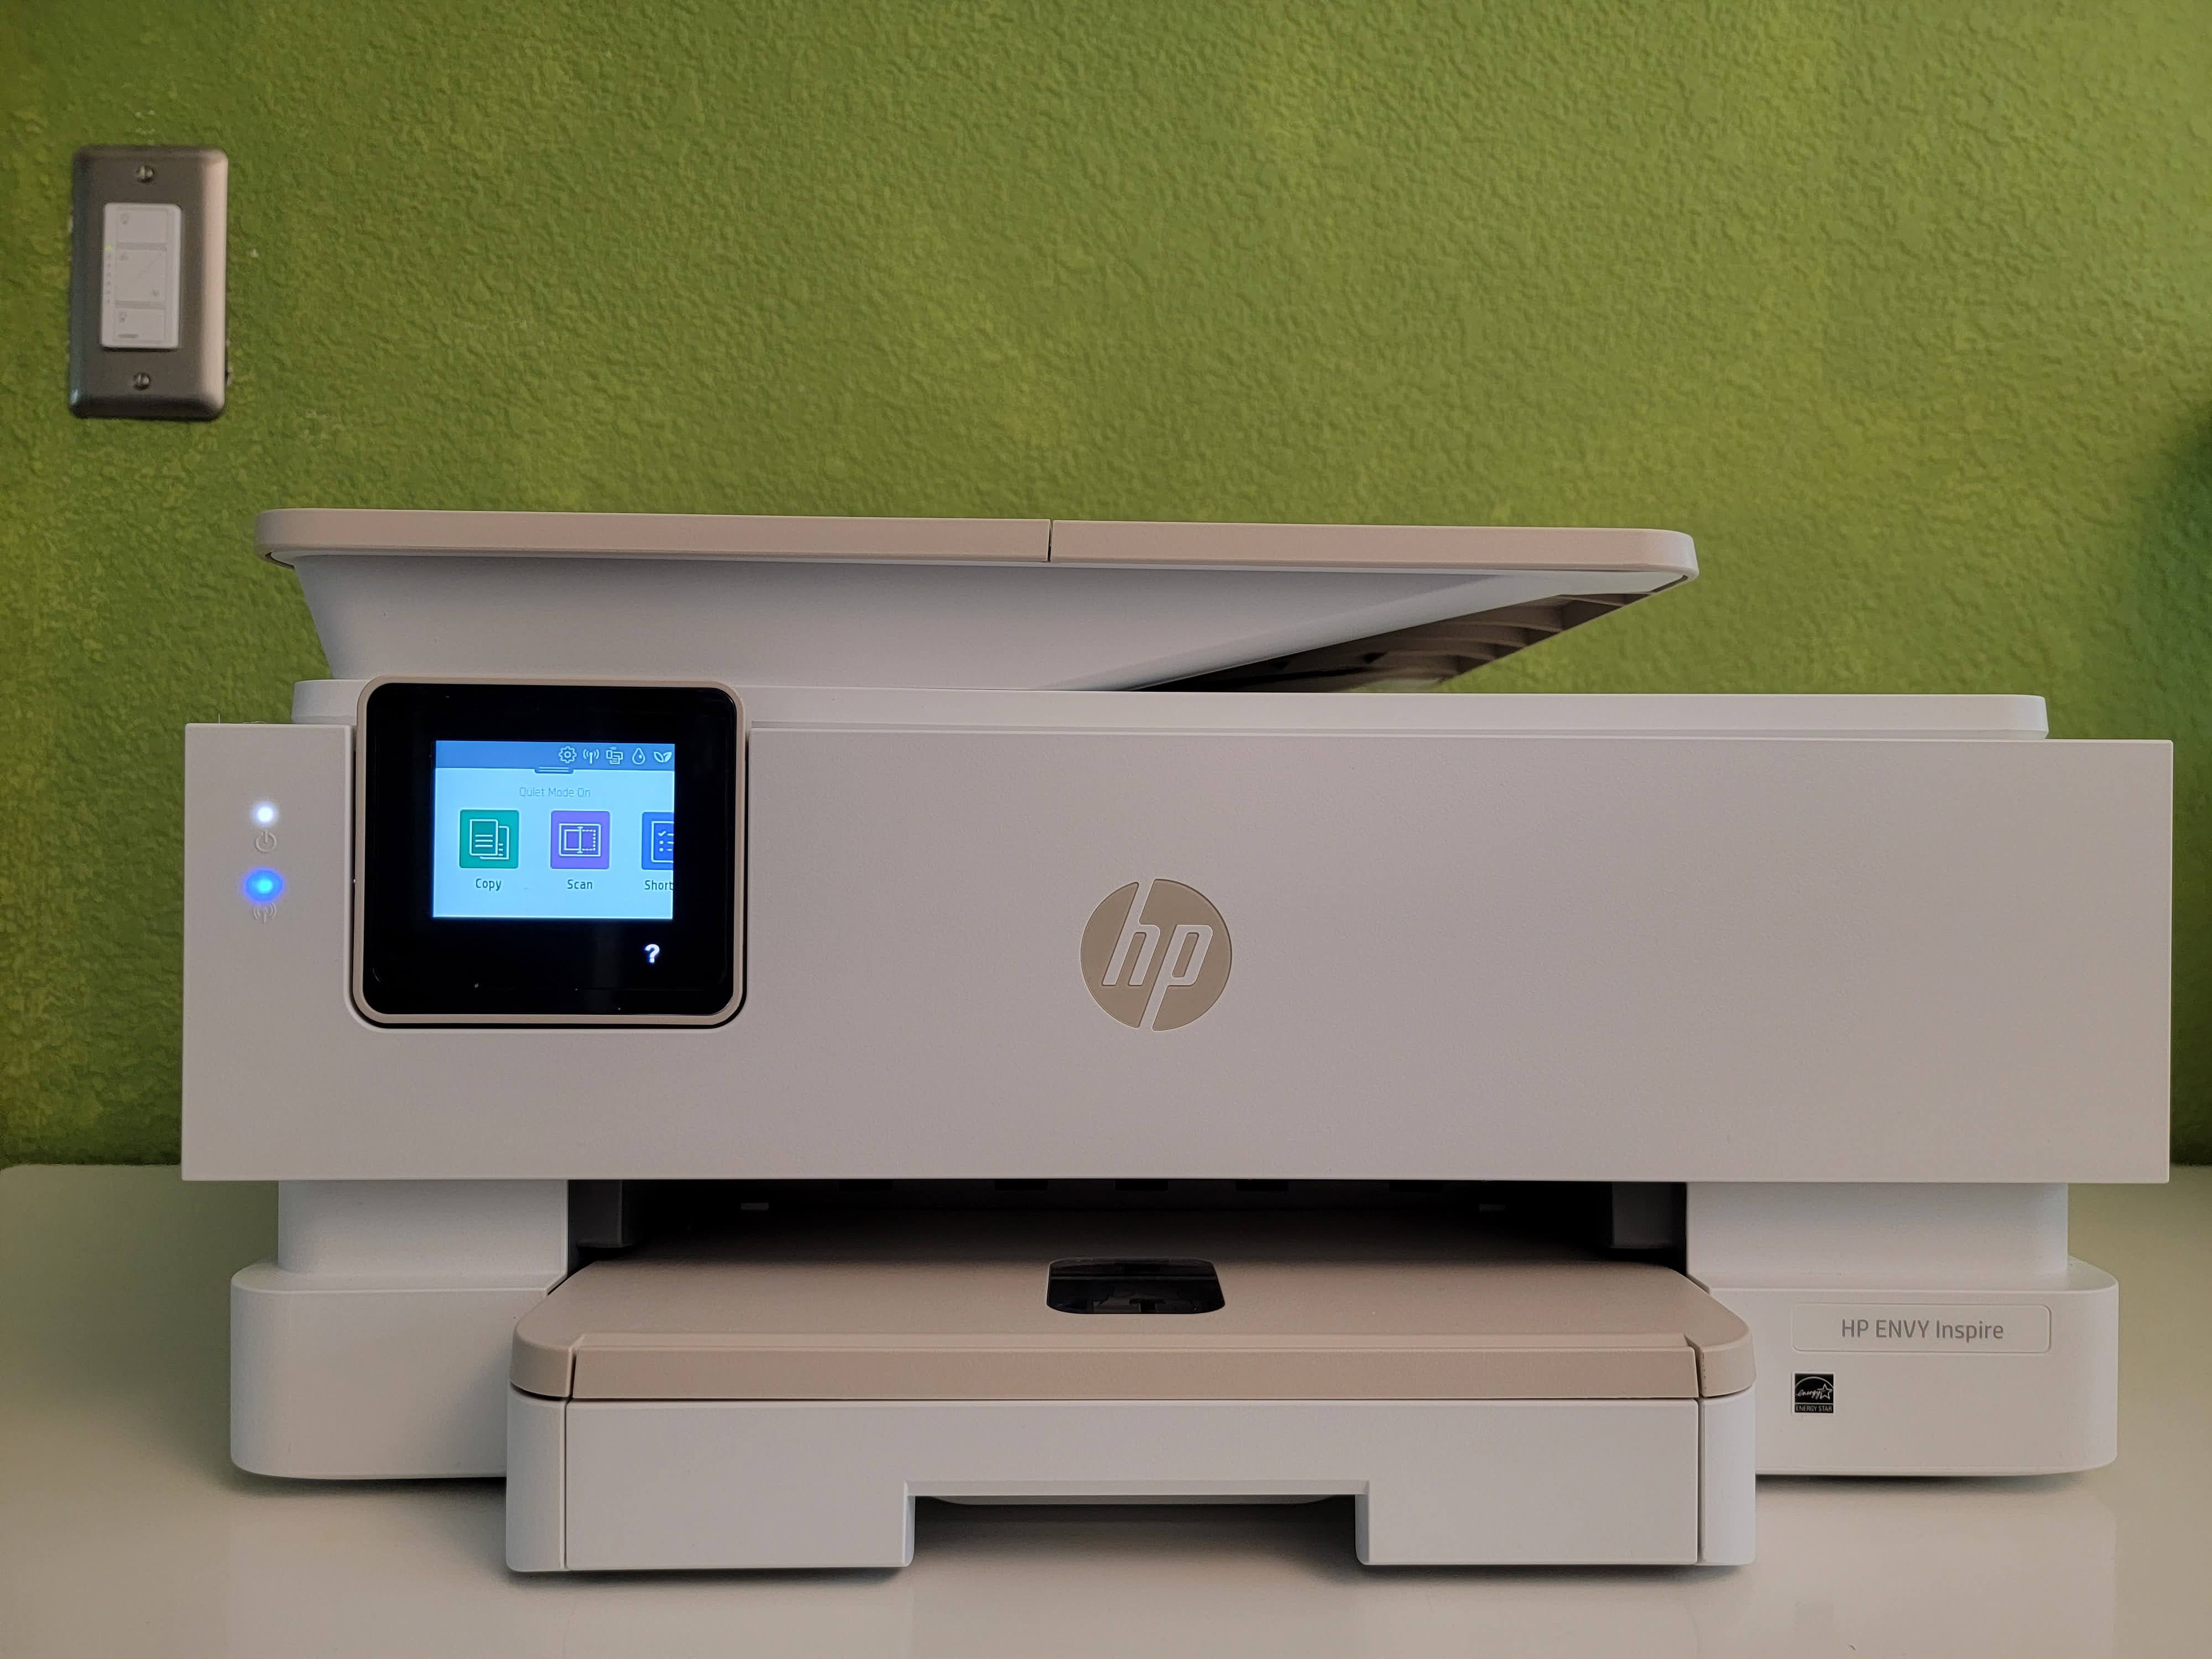 HP's Envy Inspire 7900e comes in one of four colors.